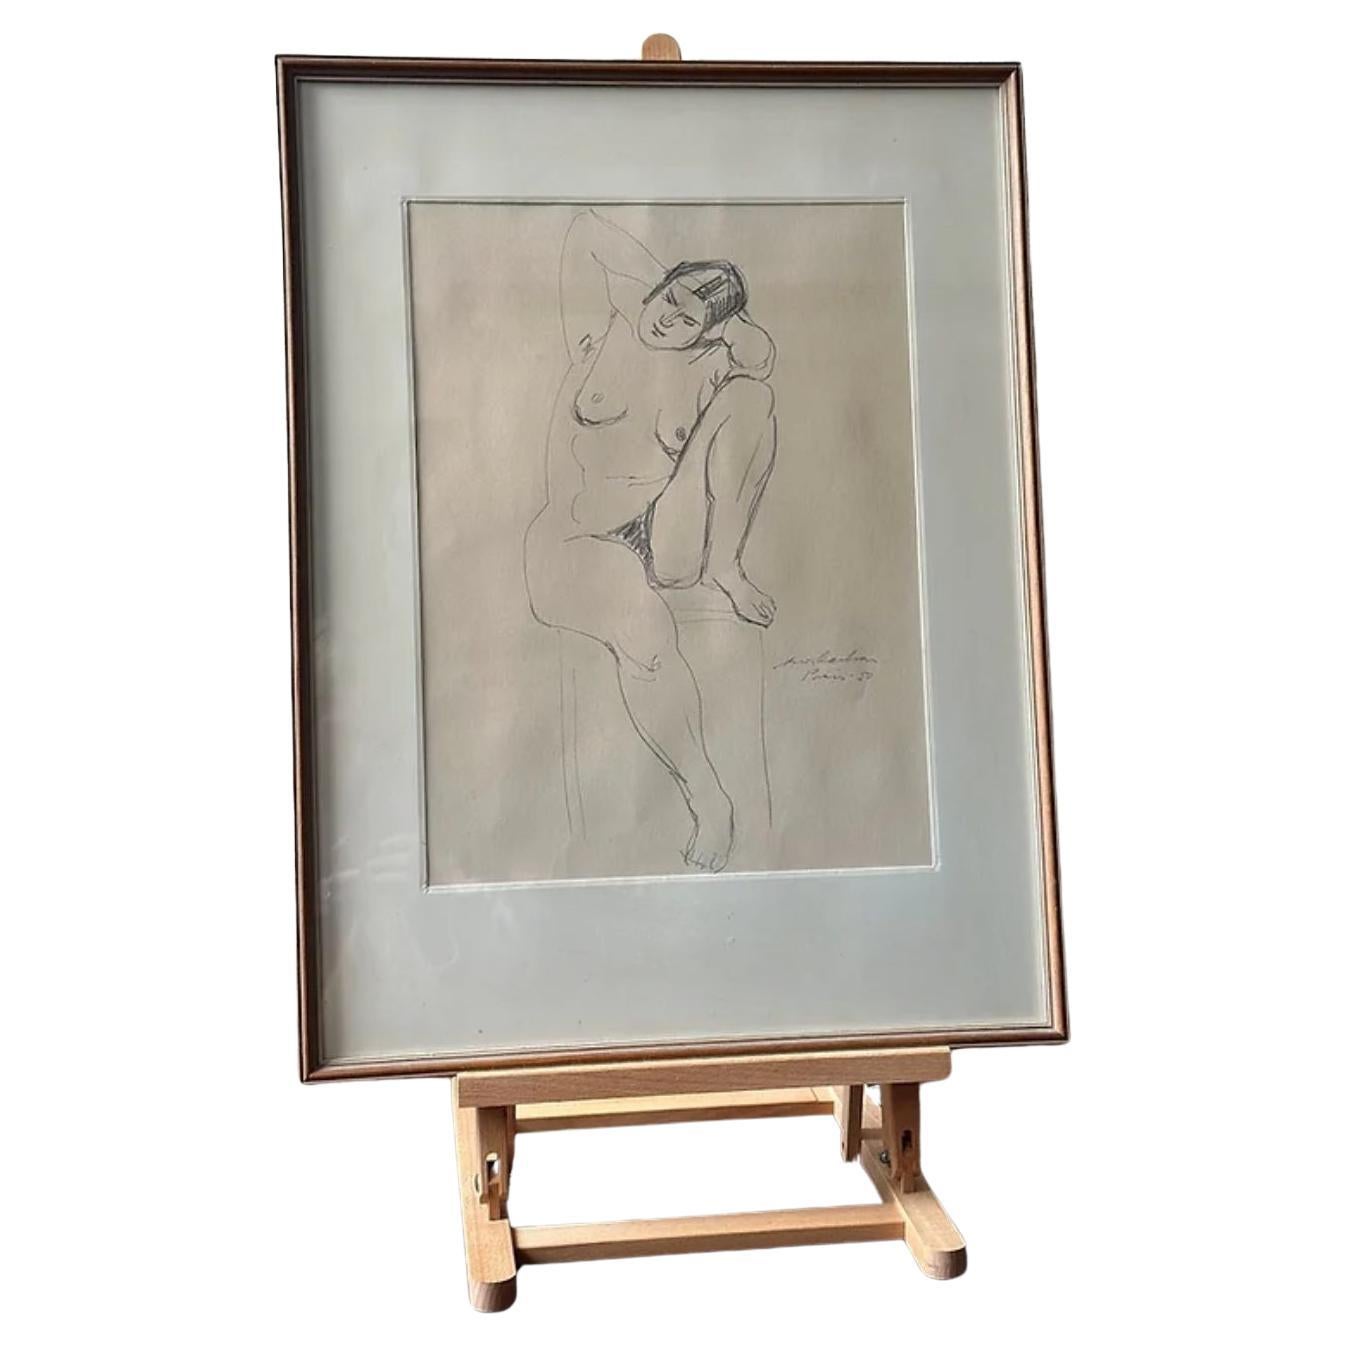 Model Study In Pencil By Arwid Karlsson, Signed & Dated, Paris - 50 For Sale